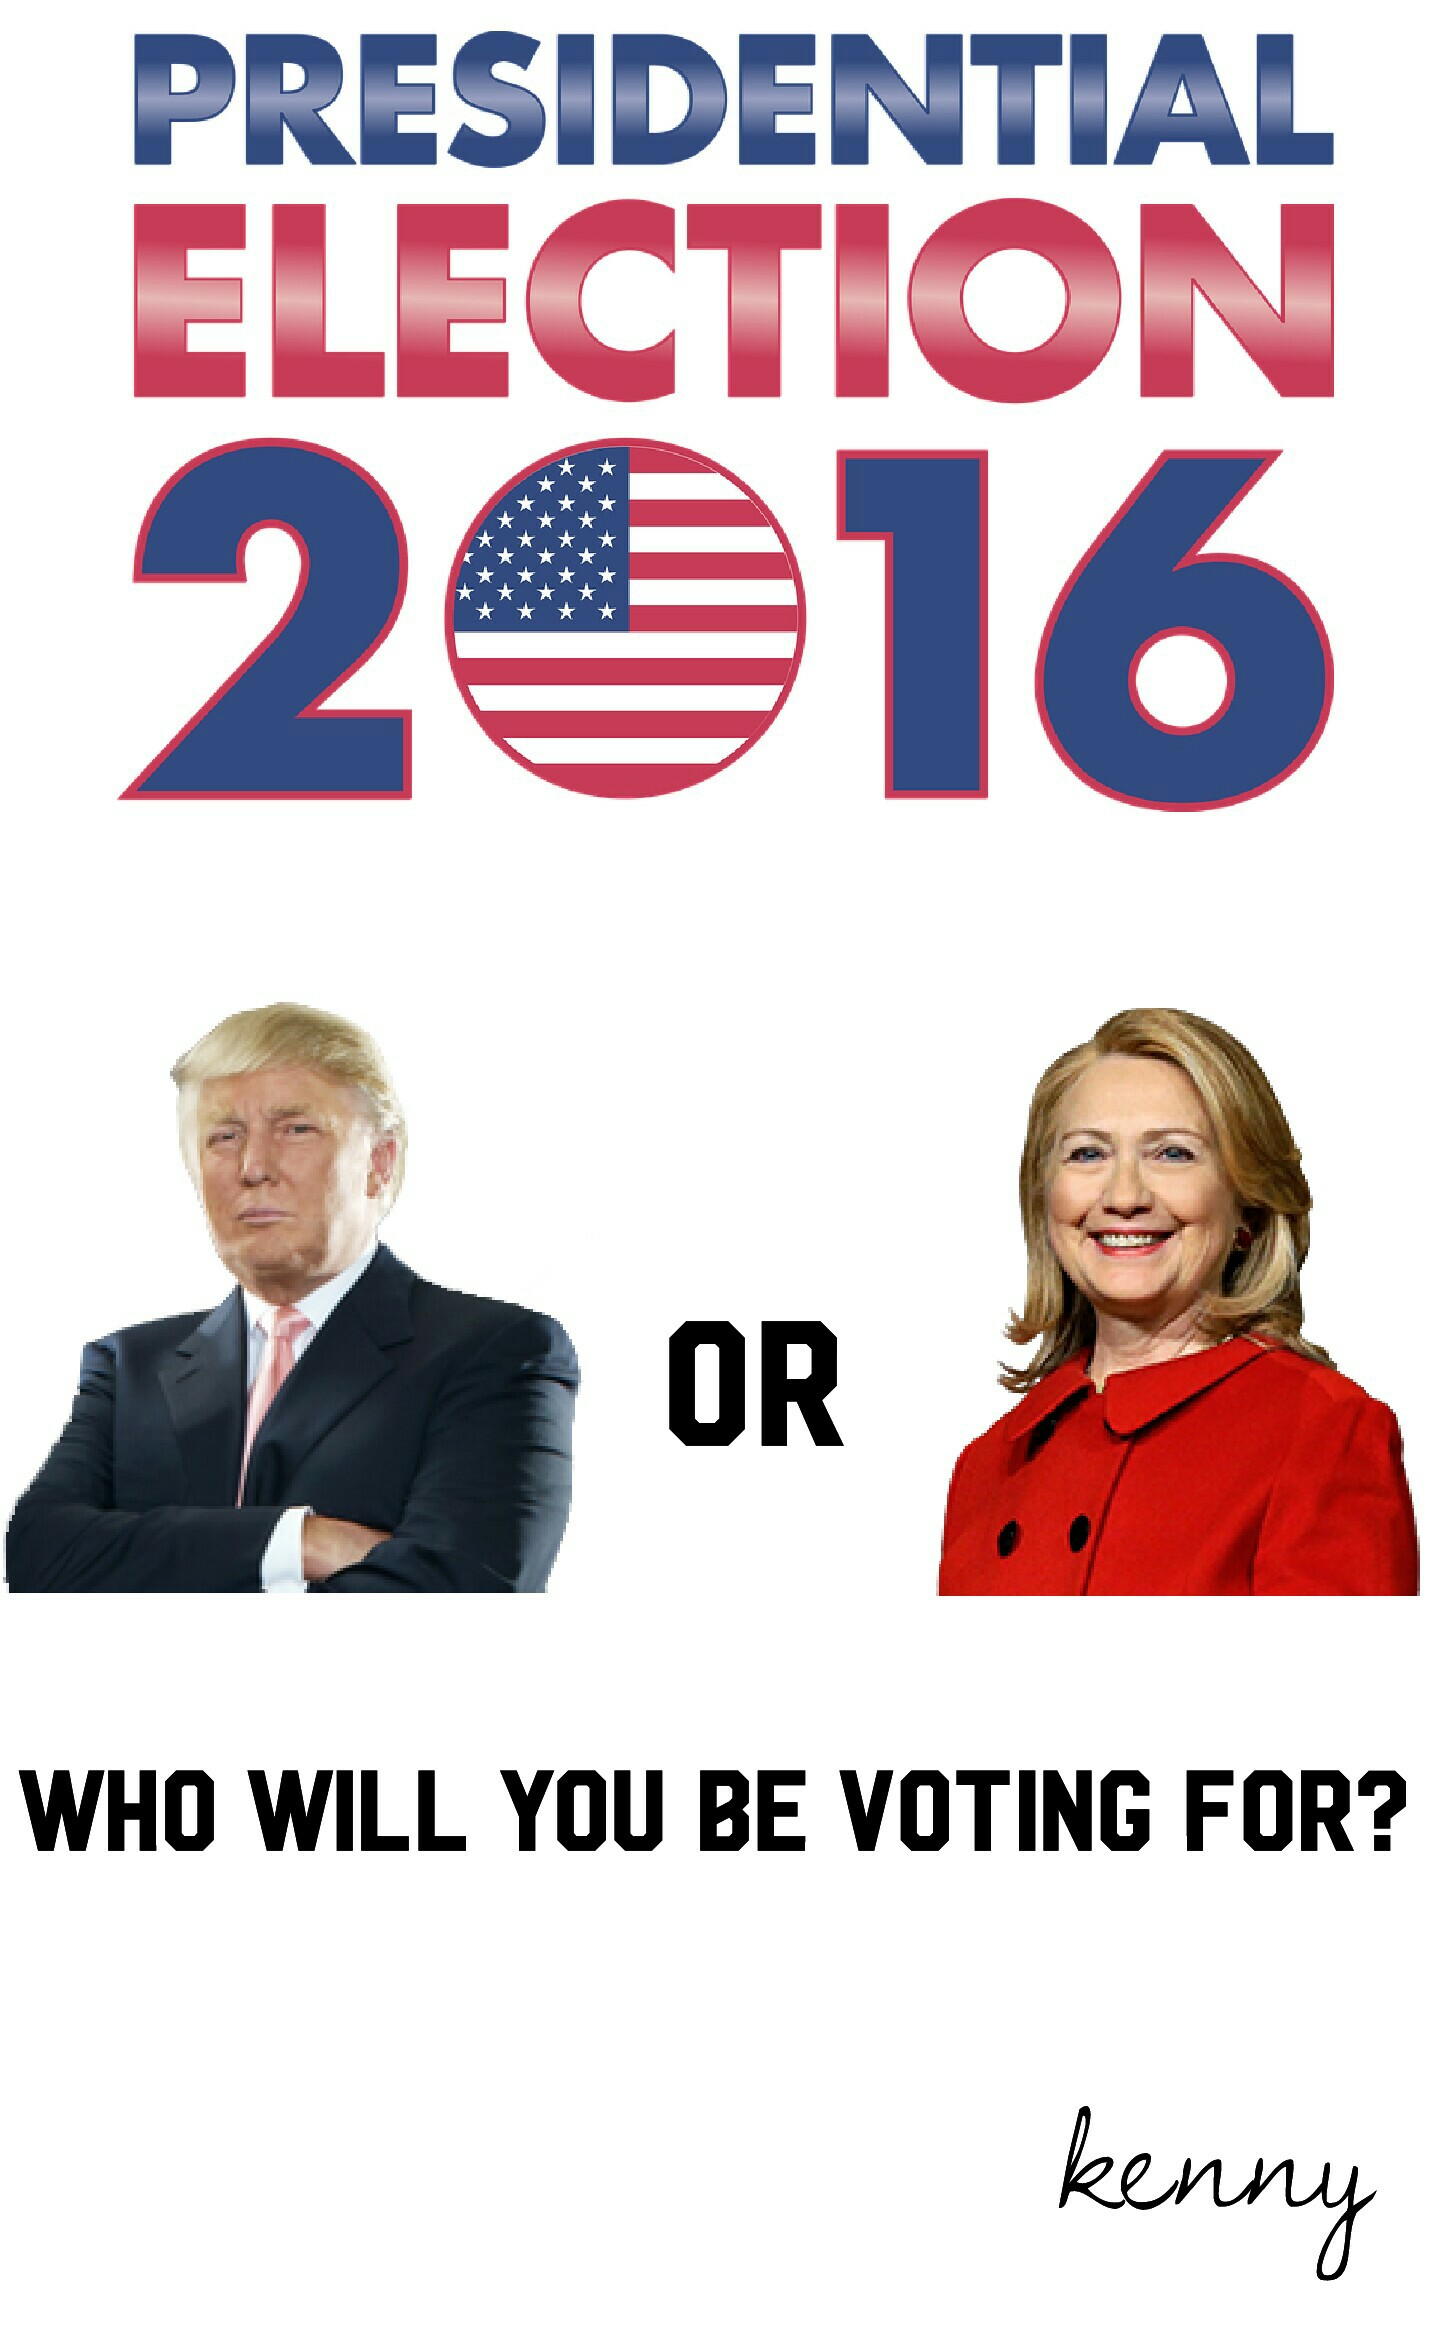 Who are you voting for this November?